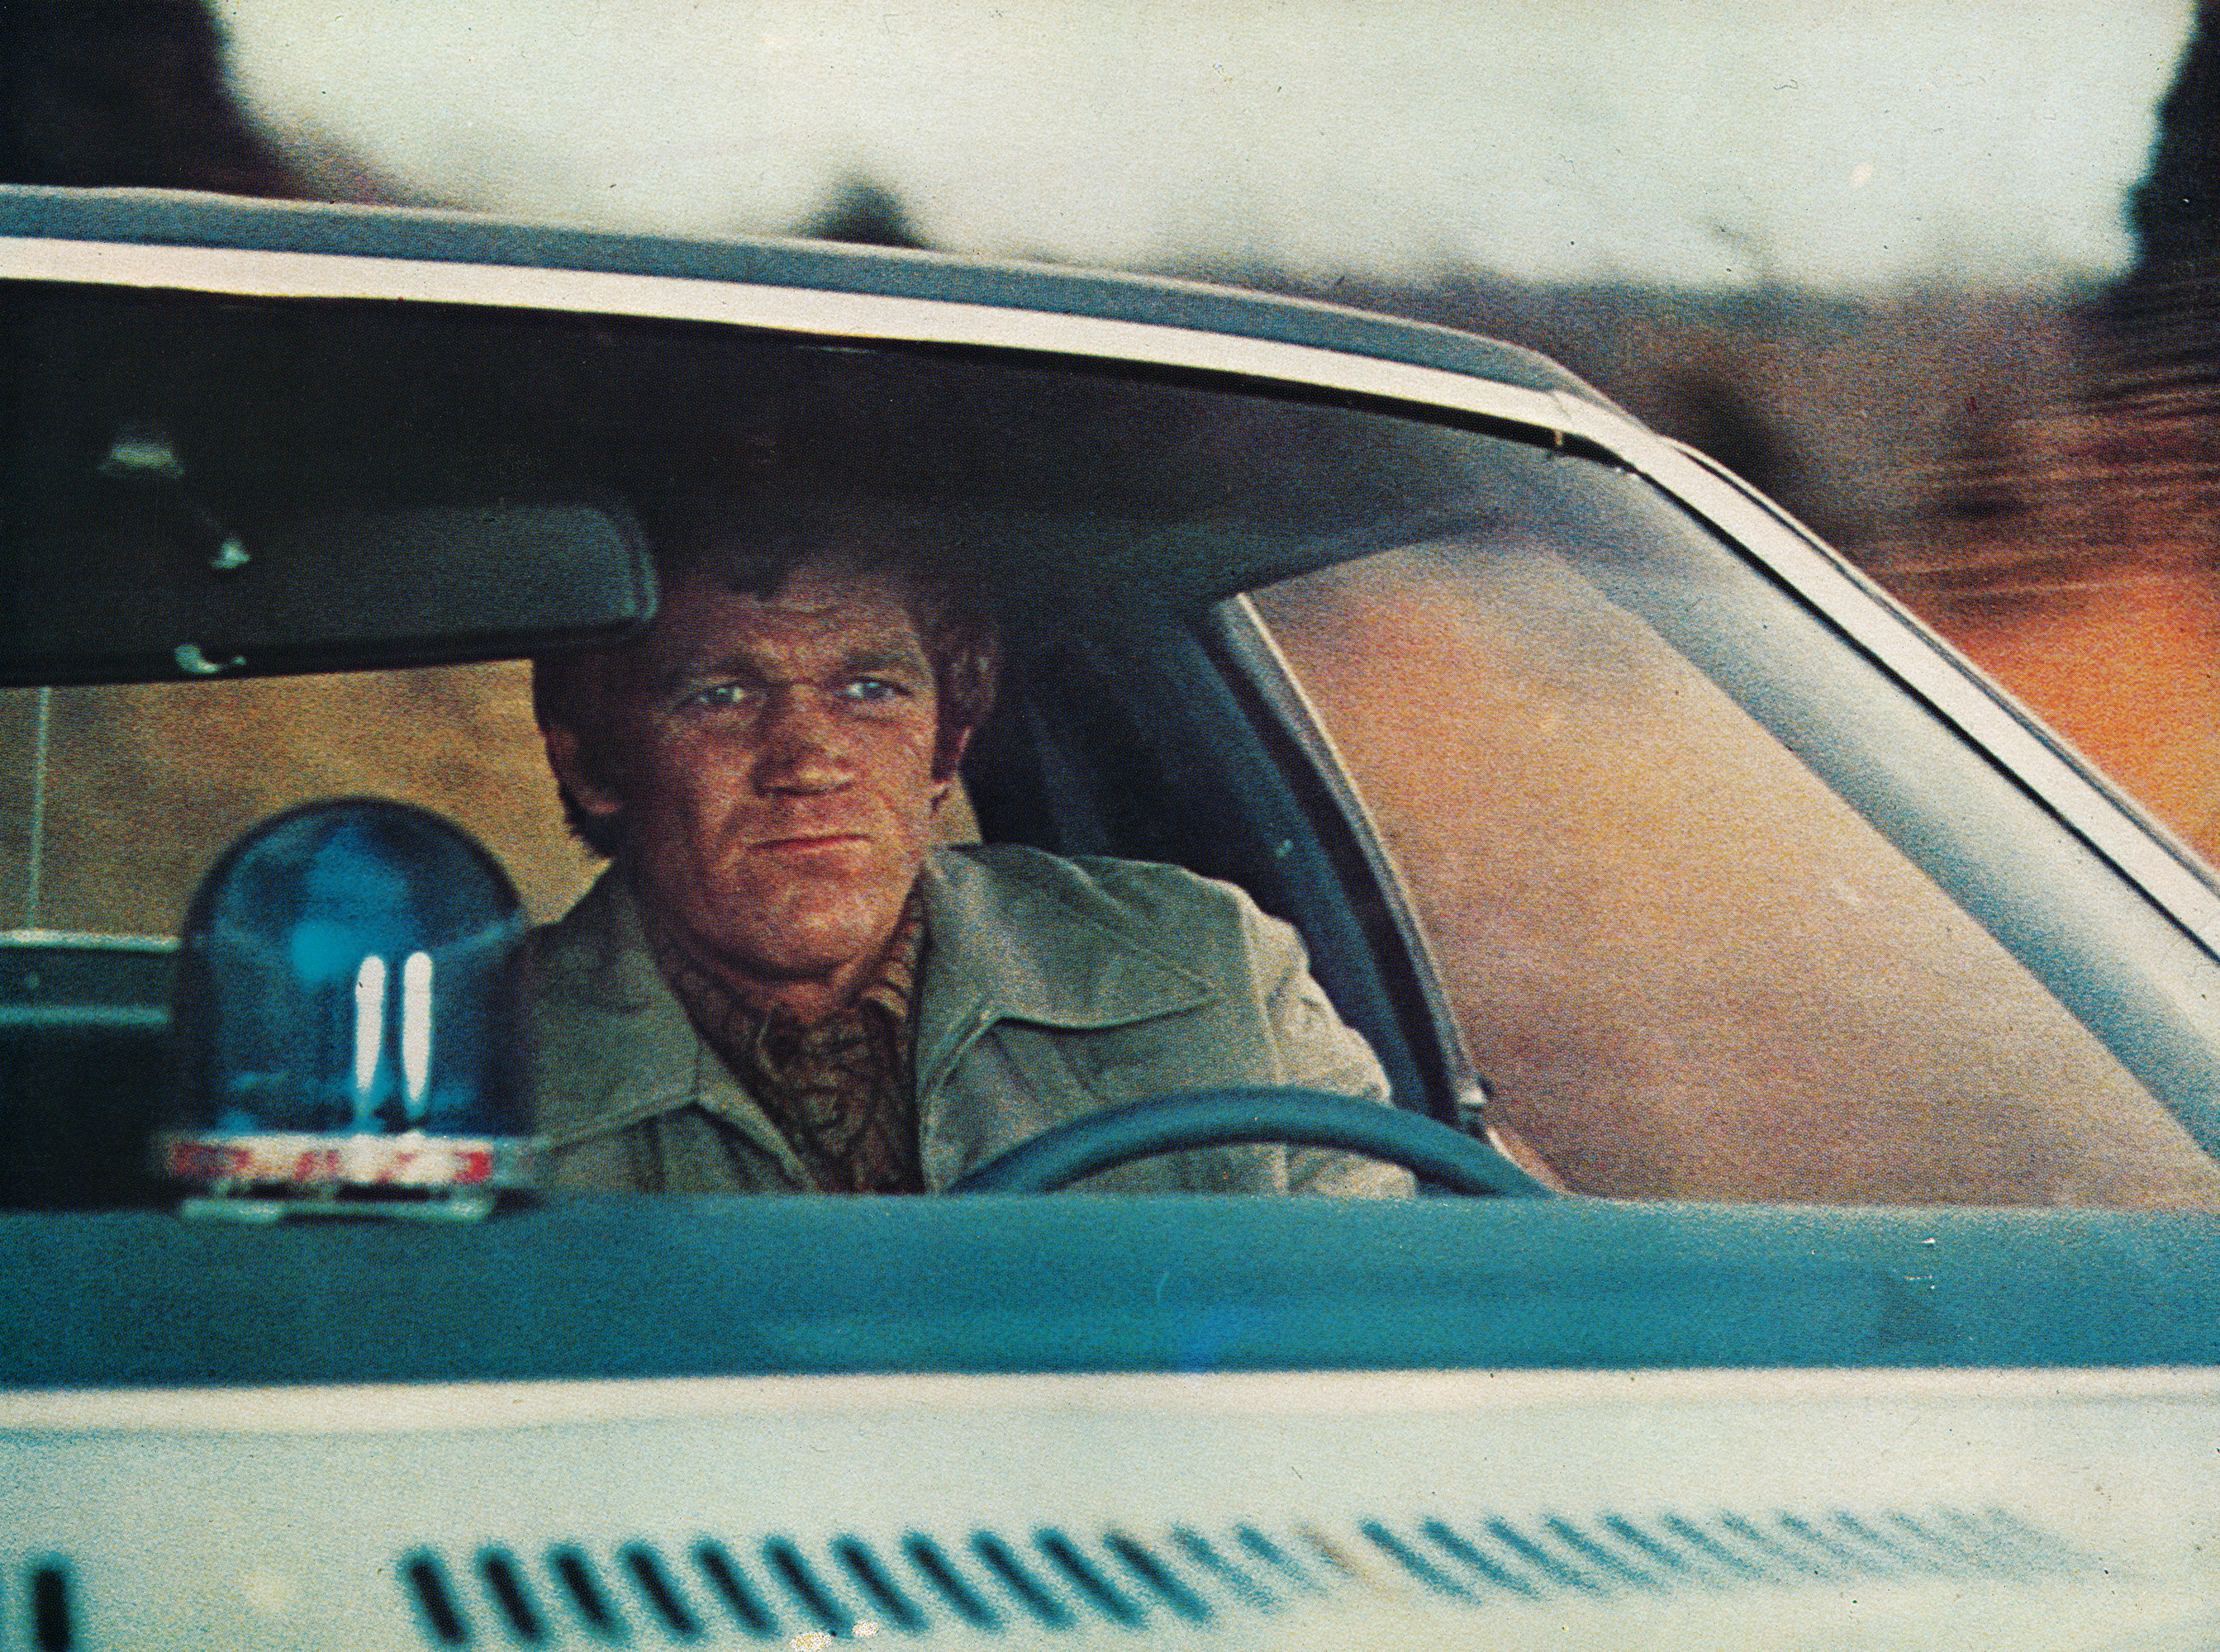 As Sheriff Buford Pusser on pursuit in 